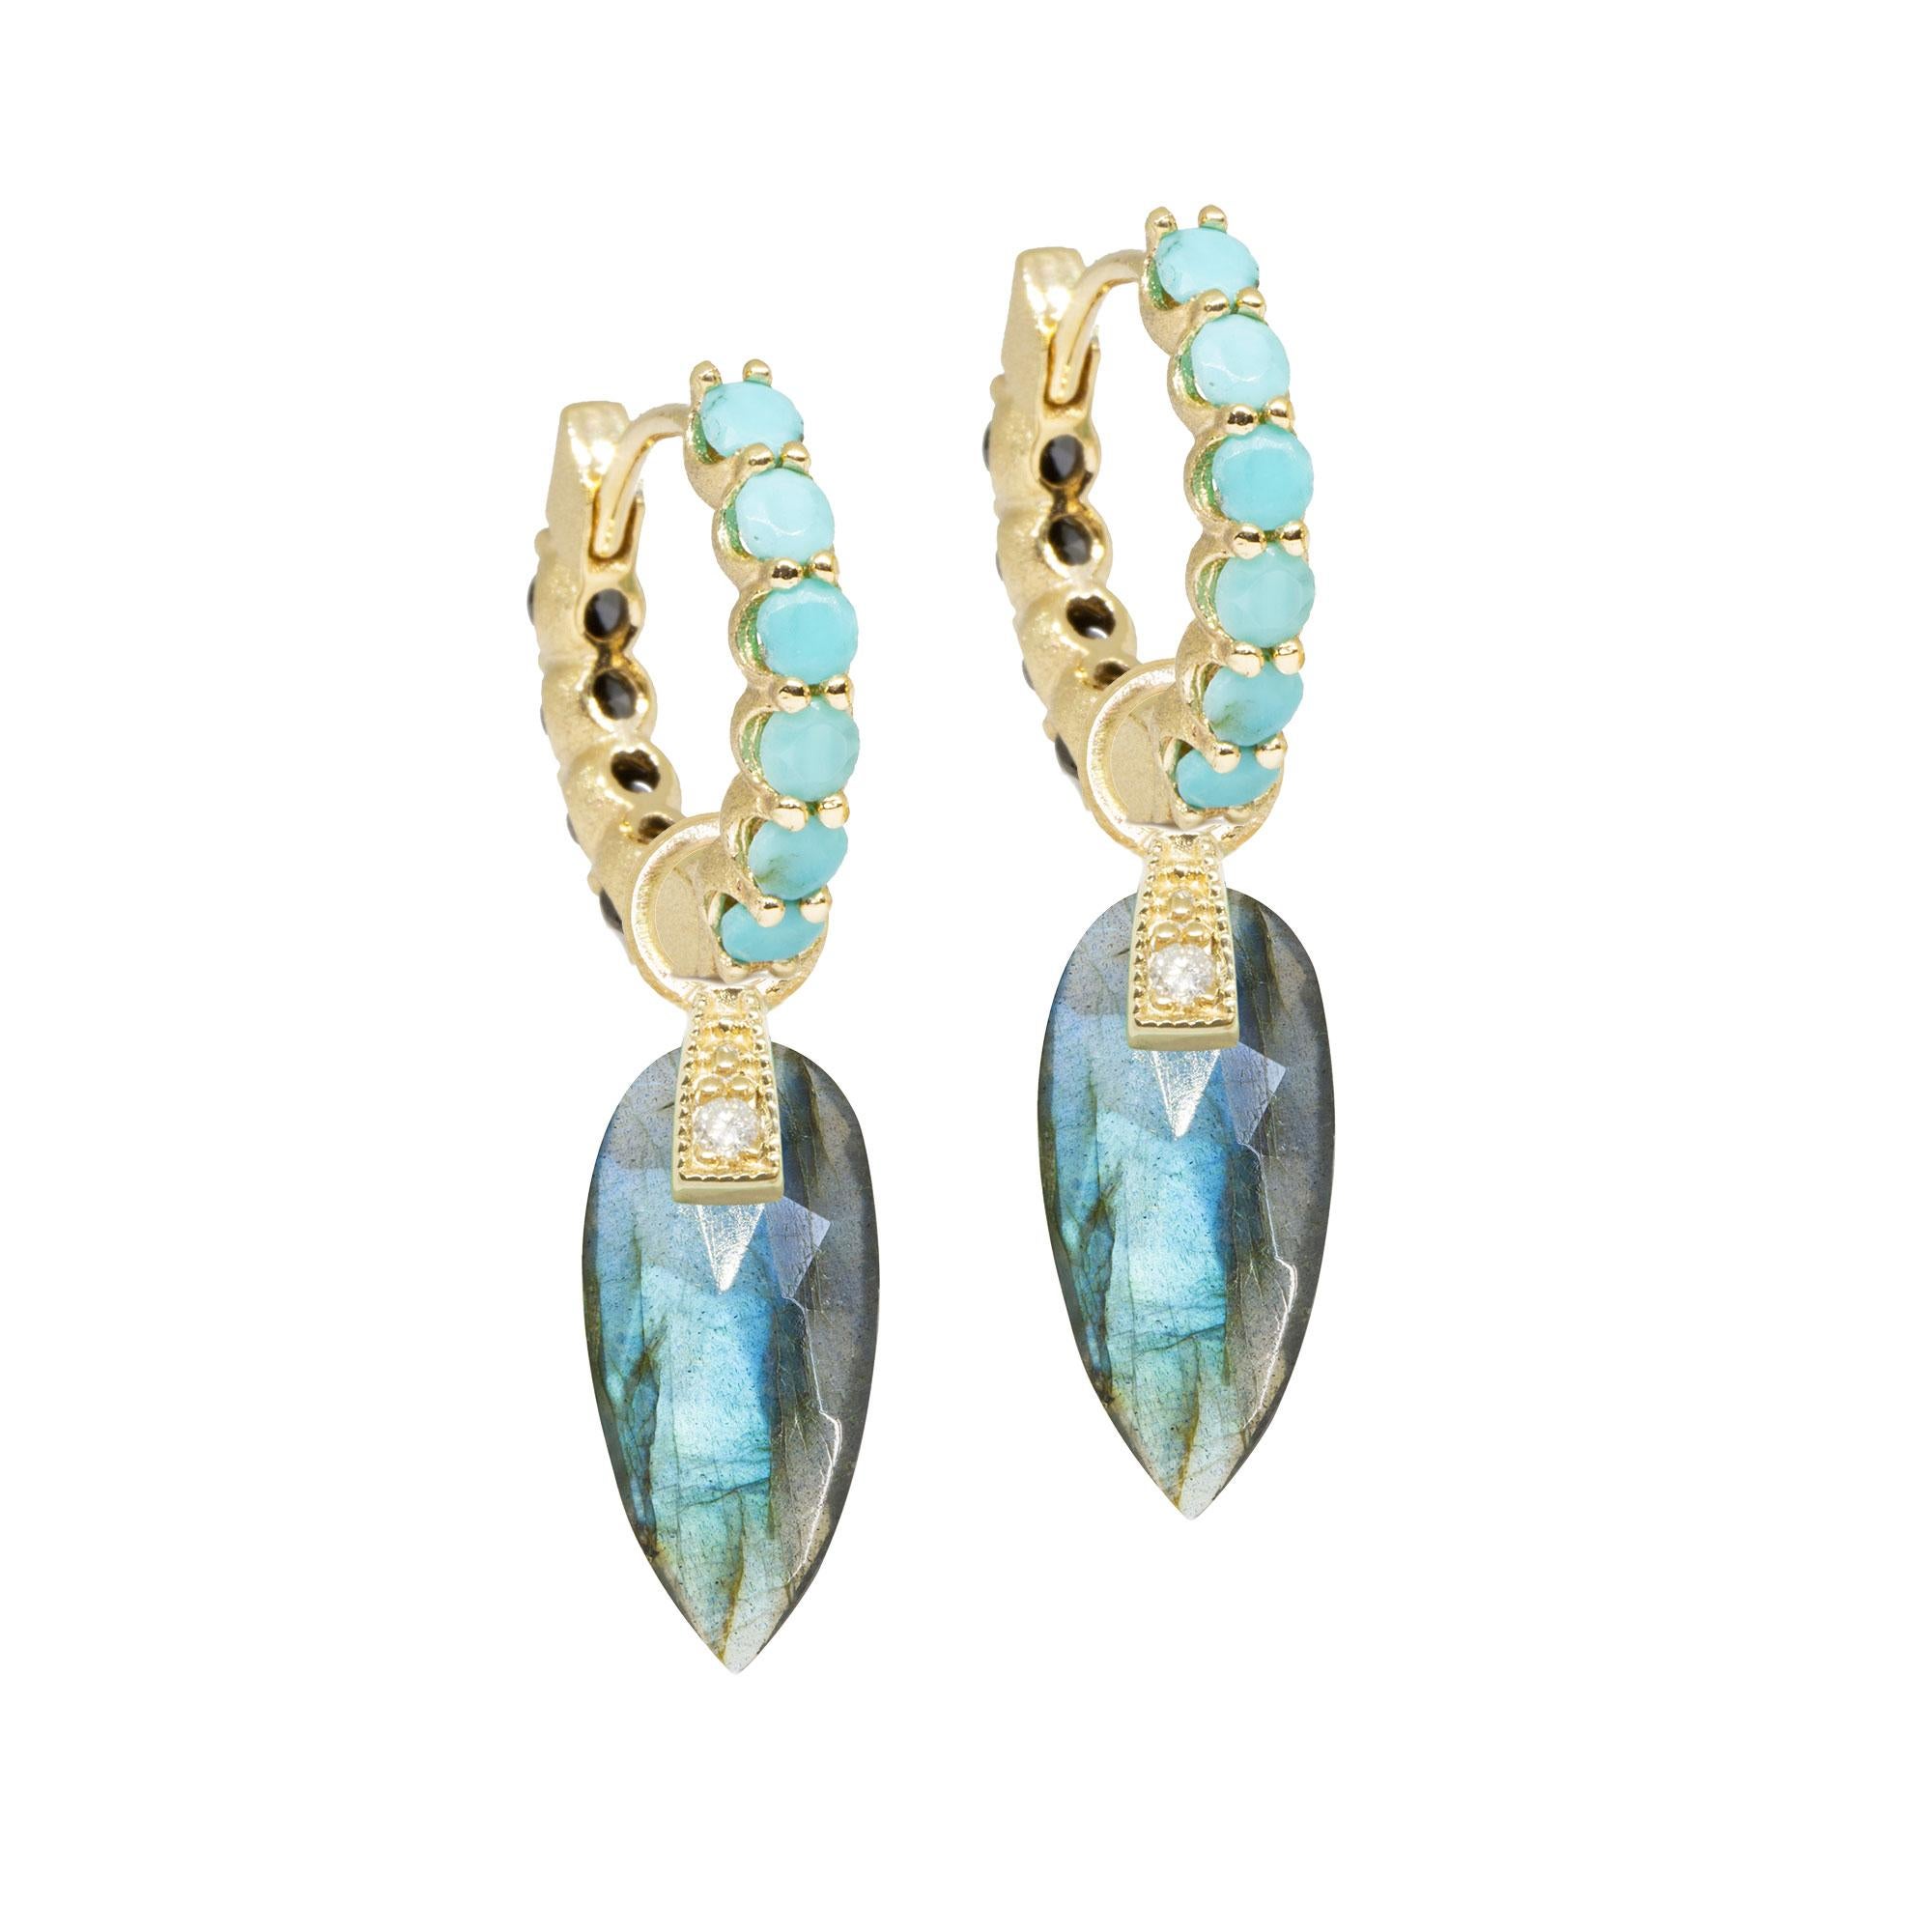 The perfect everyday style, especially when you want a pop of pale blue, the Angel Wings 15mm Gold Charms feature milky labradorite drops dangling from a diamond-studded bale.
Nina Nguyen Design's patent-pending earrings have an element on the back